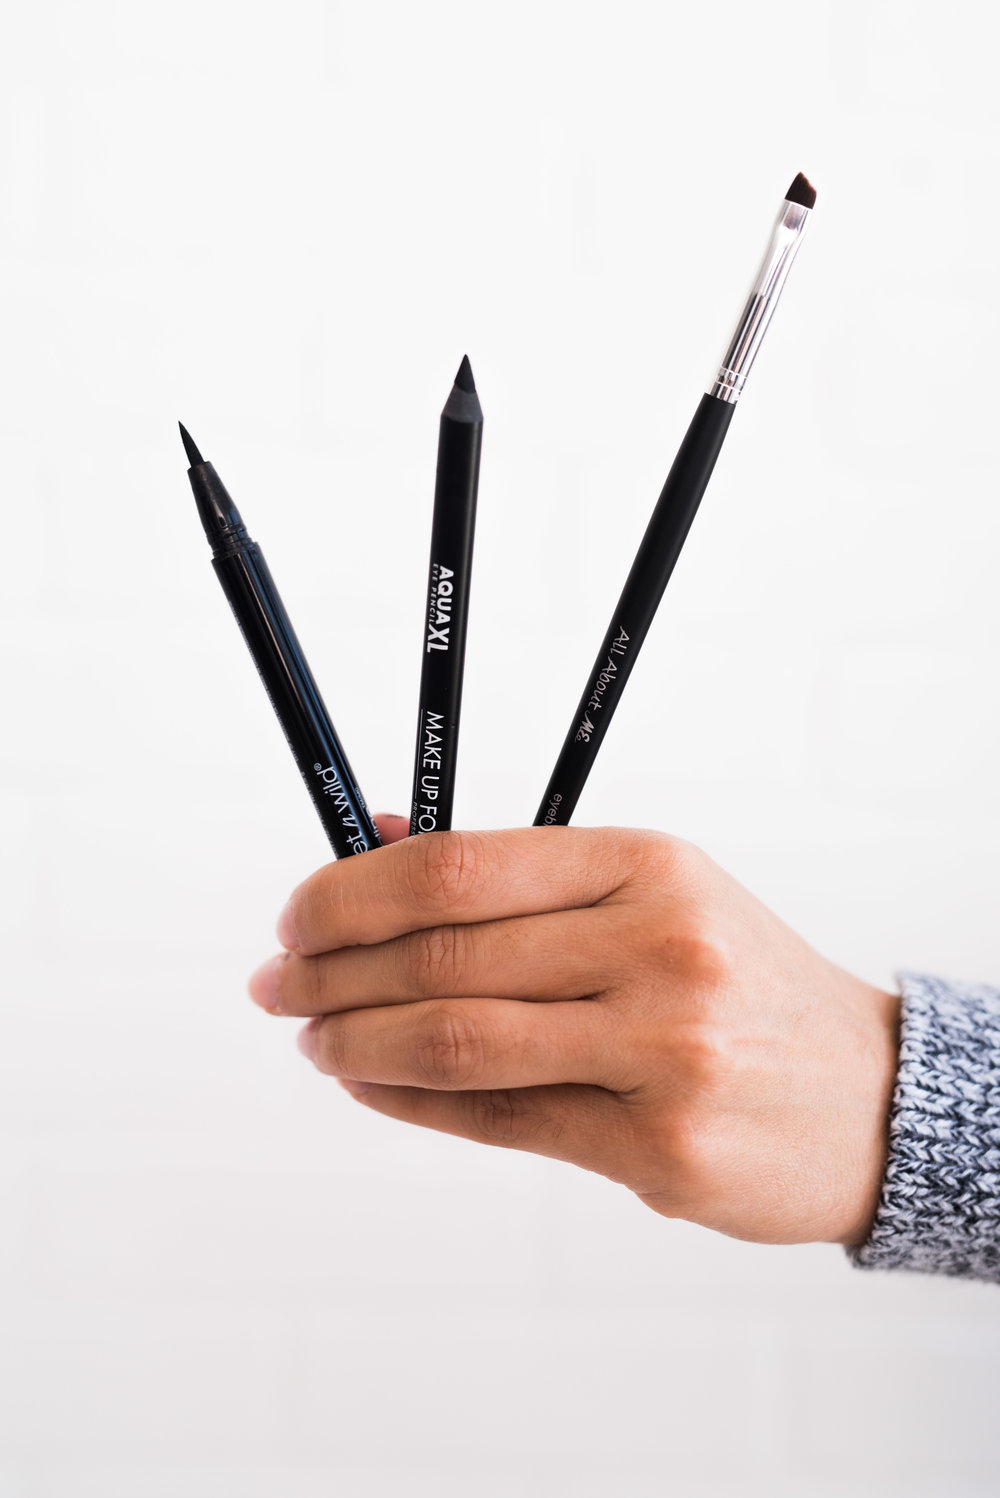  eyeliner brushes and differences, tips from a professional 